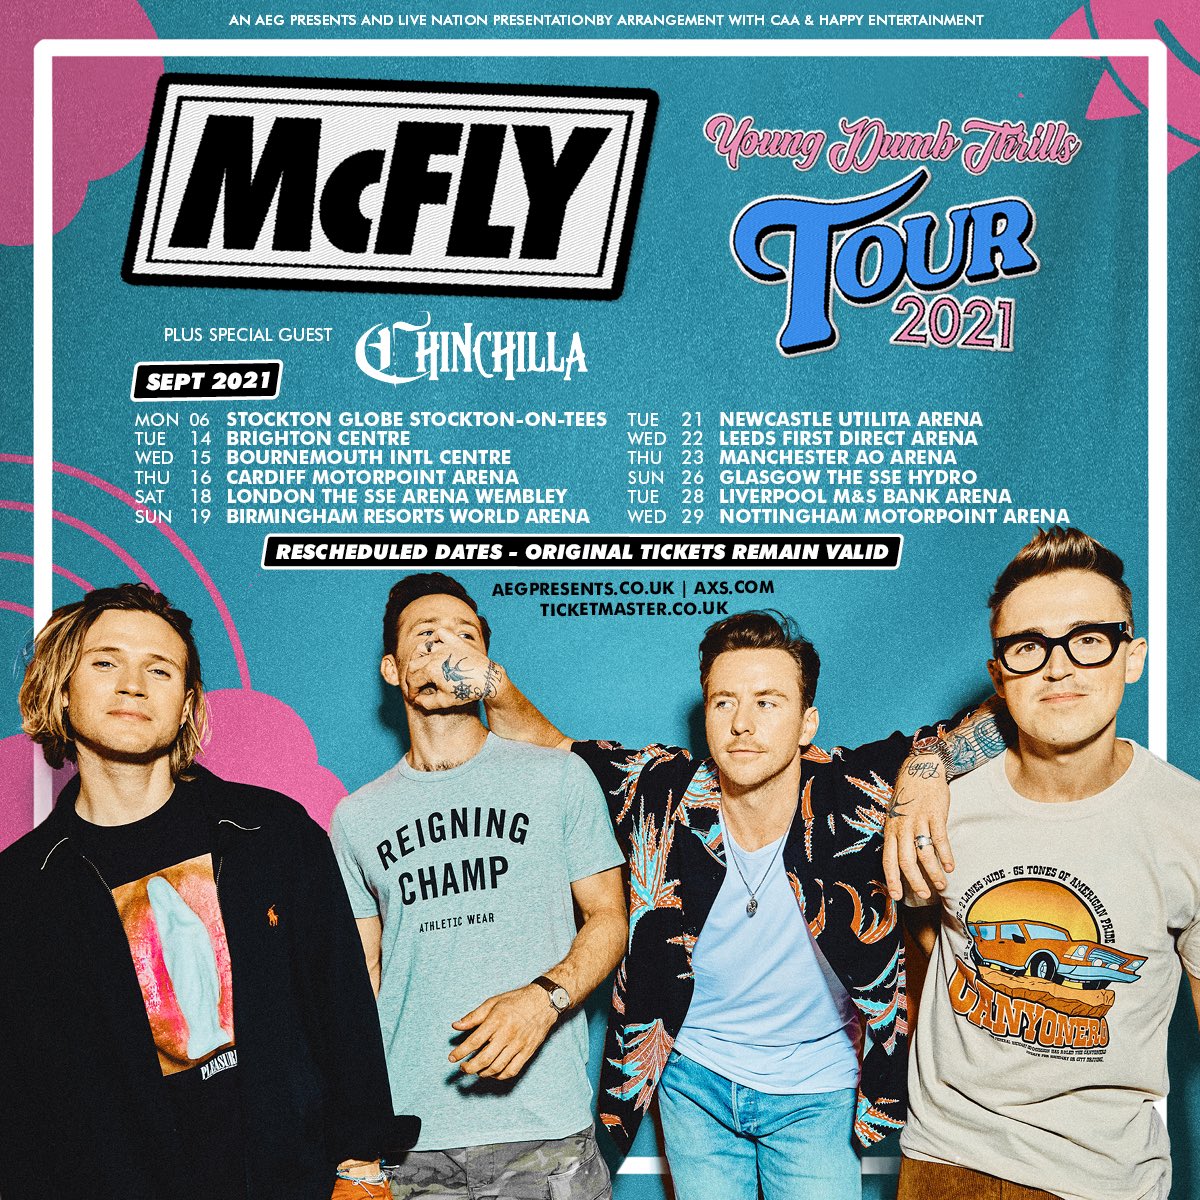 OKAY I CAN FINALLY OFFICIALLY ANNOUNCE THAT I AM GOING ON TOUR WITH MCFLY AAGGGH 🤯🤯🤯 

No words other than FAACCCKK YOU BESTA BE READY FOR THE SHOW I’M ABOUT TO PUT ON. Buzzing.✨🥵

@TomFletcher @DougiePoynter @mcflyharry @itsDannyJones 

#youngdumbthrills